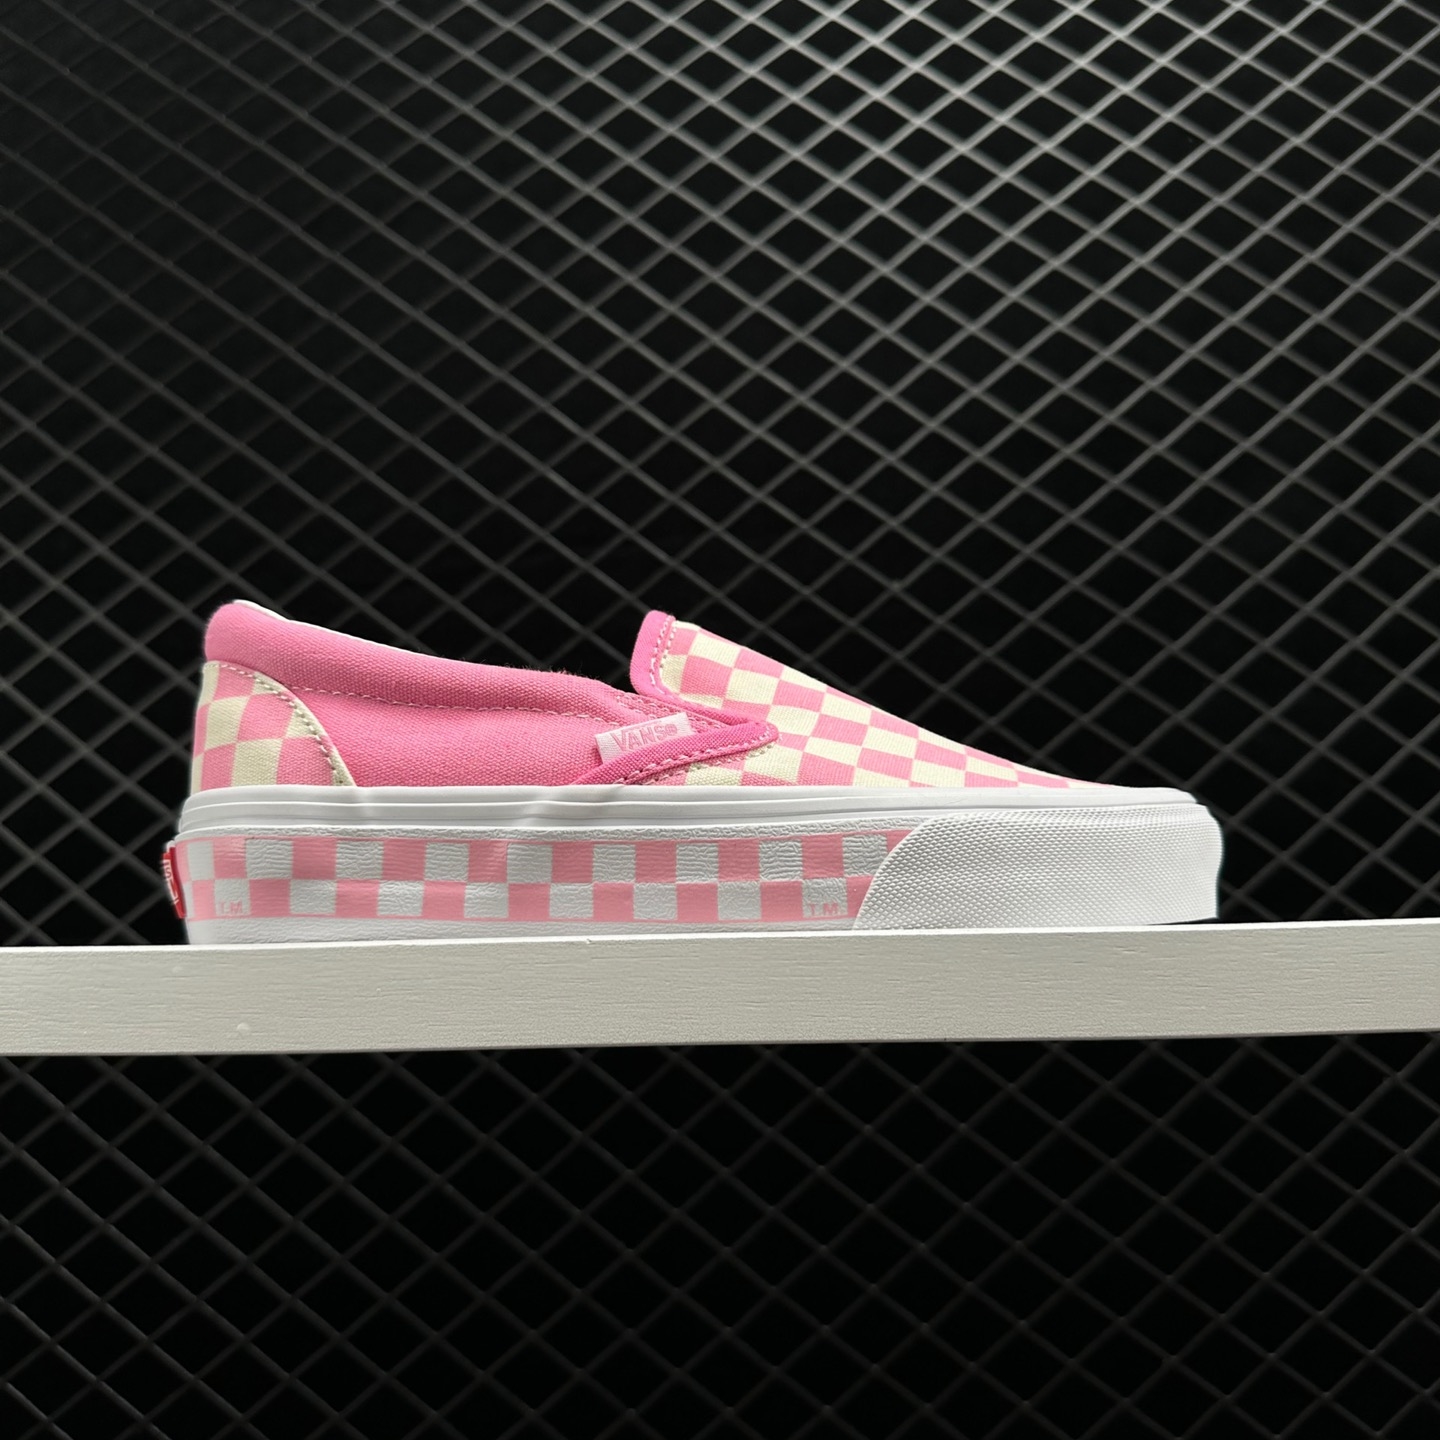 Vans Classic Slip-On Sidewall Check Coral Blush Shoes - VN0A38F7RA8